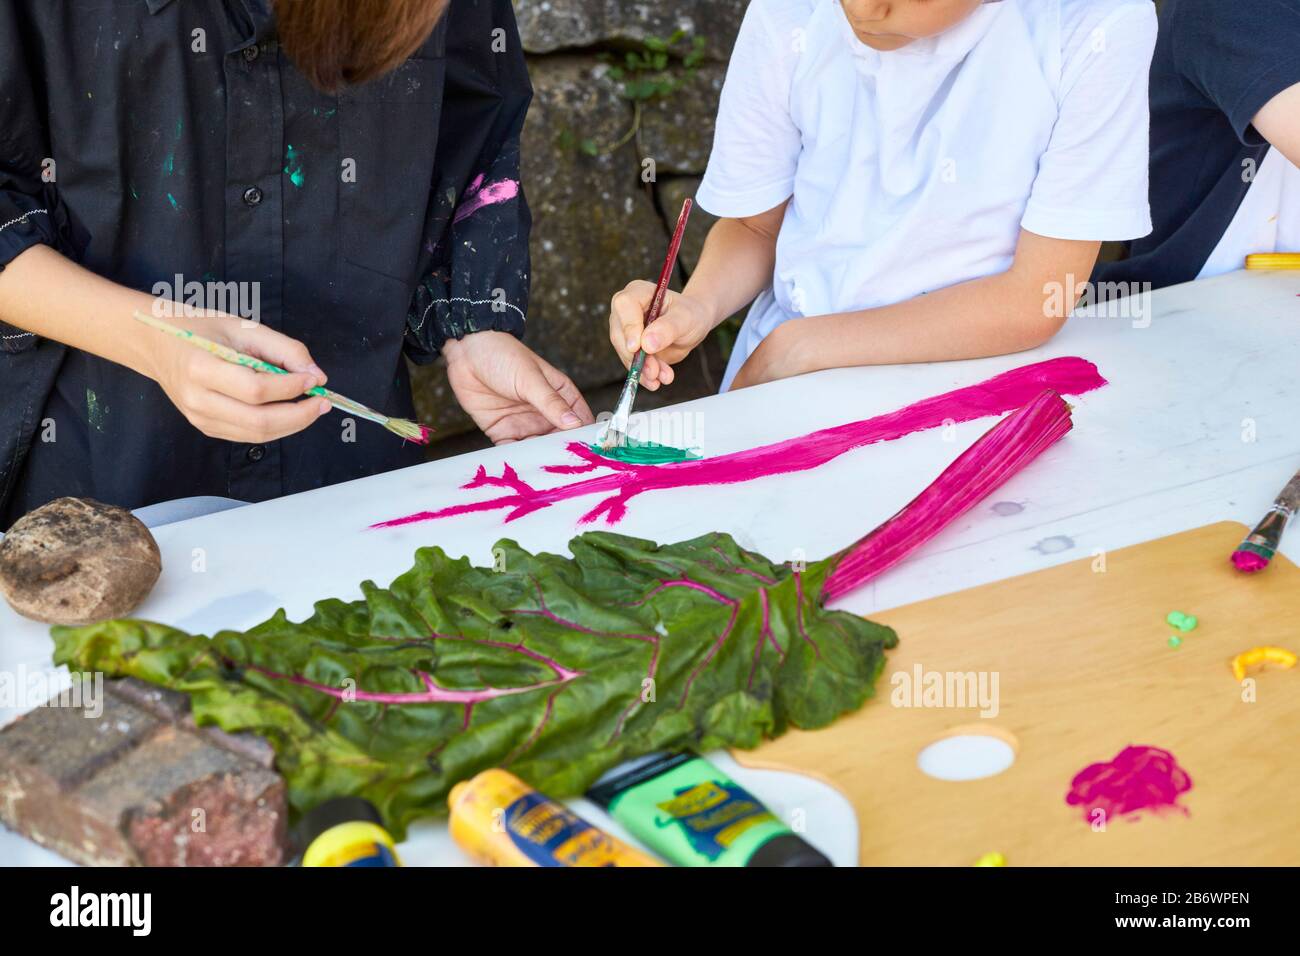 Children investigating food. Series: Painting vegetables, in this case Swiss chard. Learning according to the Reggio Pedagogy principle, playful understanding and discovery. Germany. Stock Photo